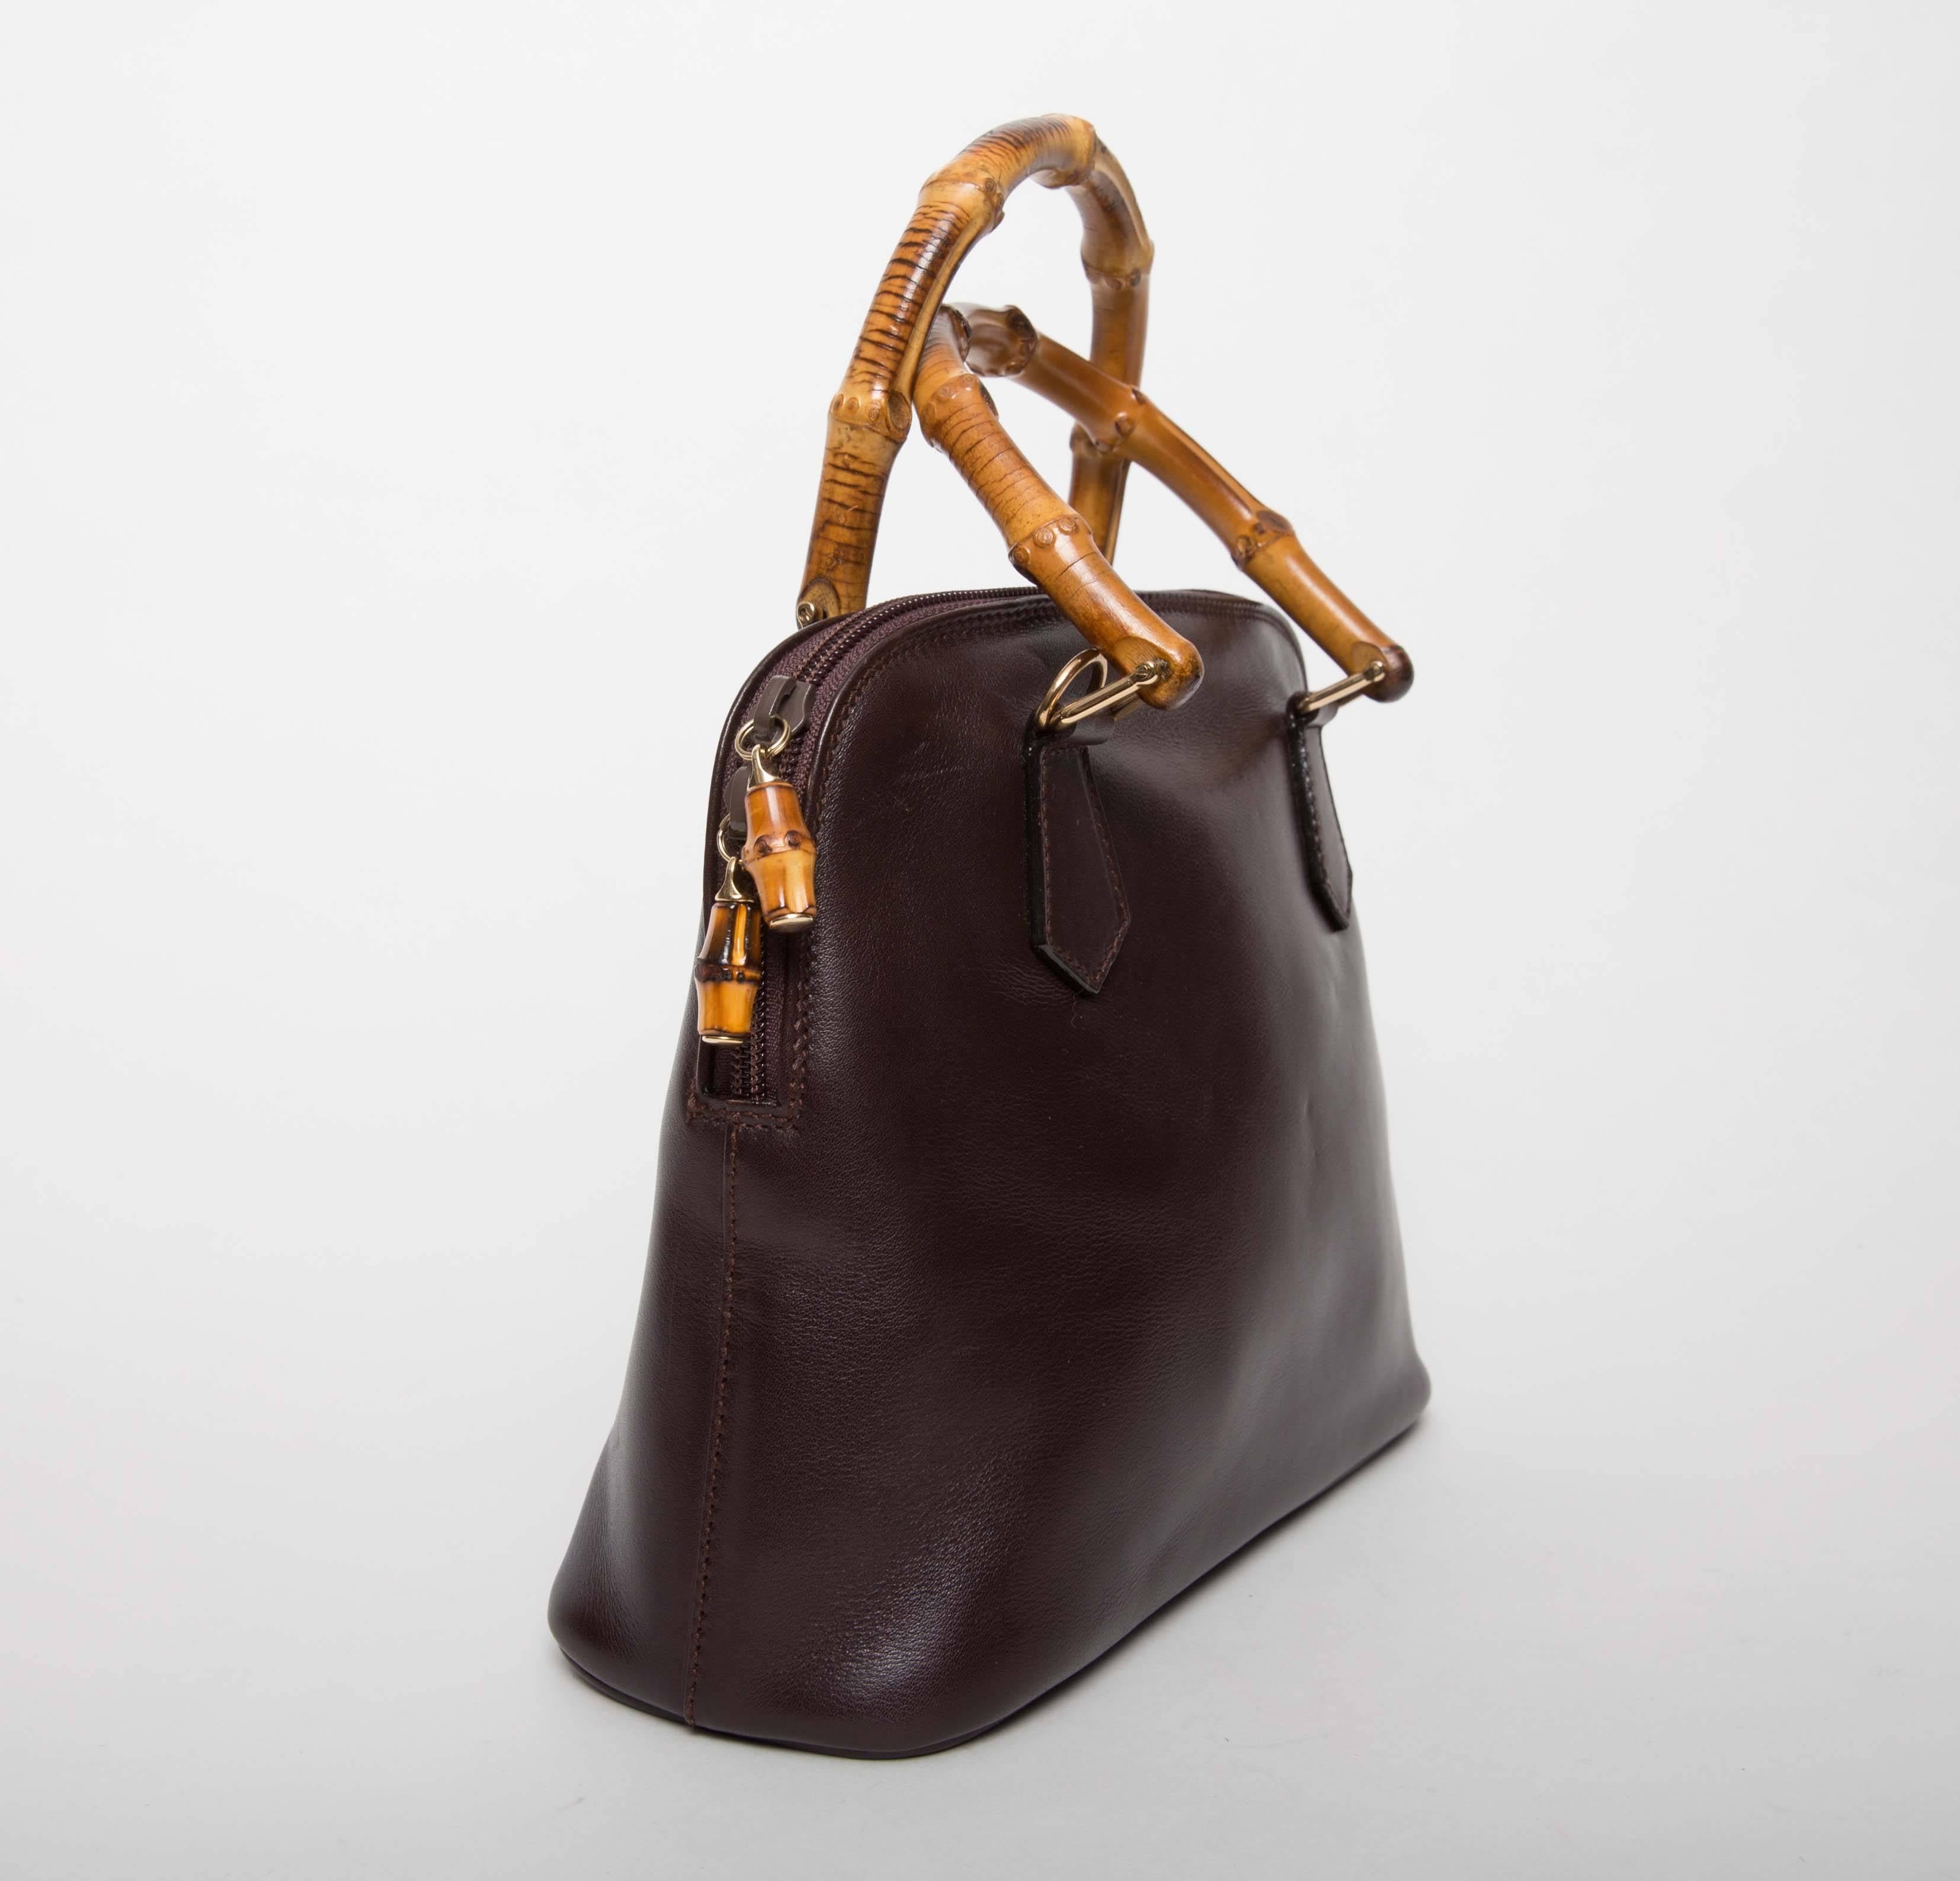  Gucci Vintage Alma Tote in Dark Brown Leather with Bamboo Handles features double bamboo wooden handles,
bamboo zipper fobs, top zip closure.  Five bottom feet,
inside one zip pocket.  This bag has original tags , removable cross body strap,
and